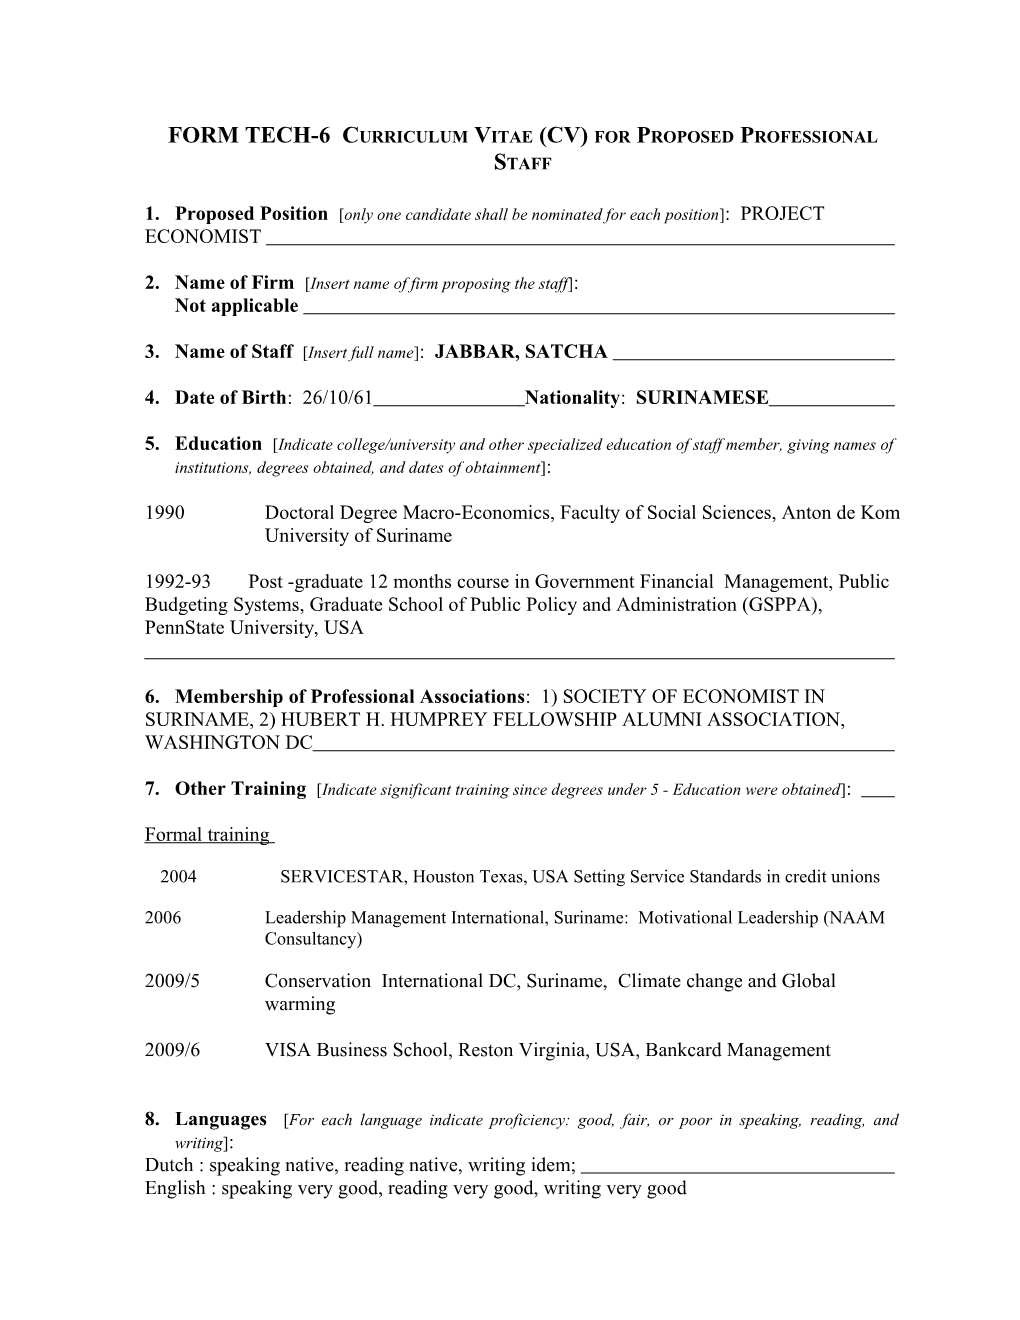 FORM TECH-6 Curriculum Vitae (CV) for Proposed Professional Staff